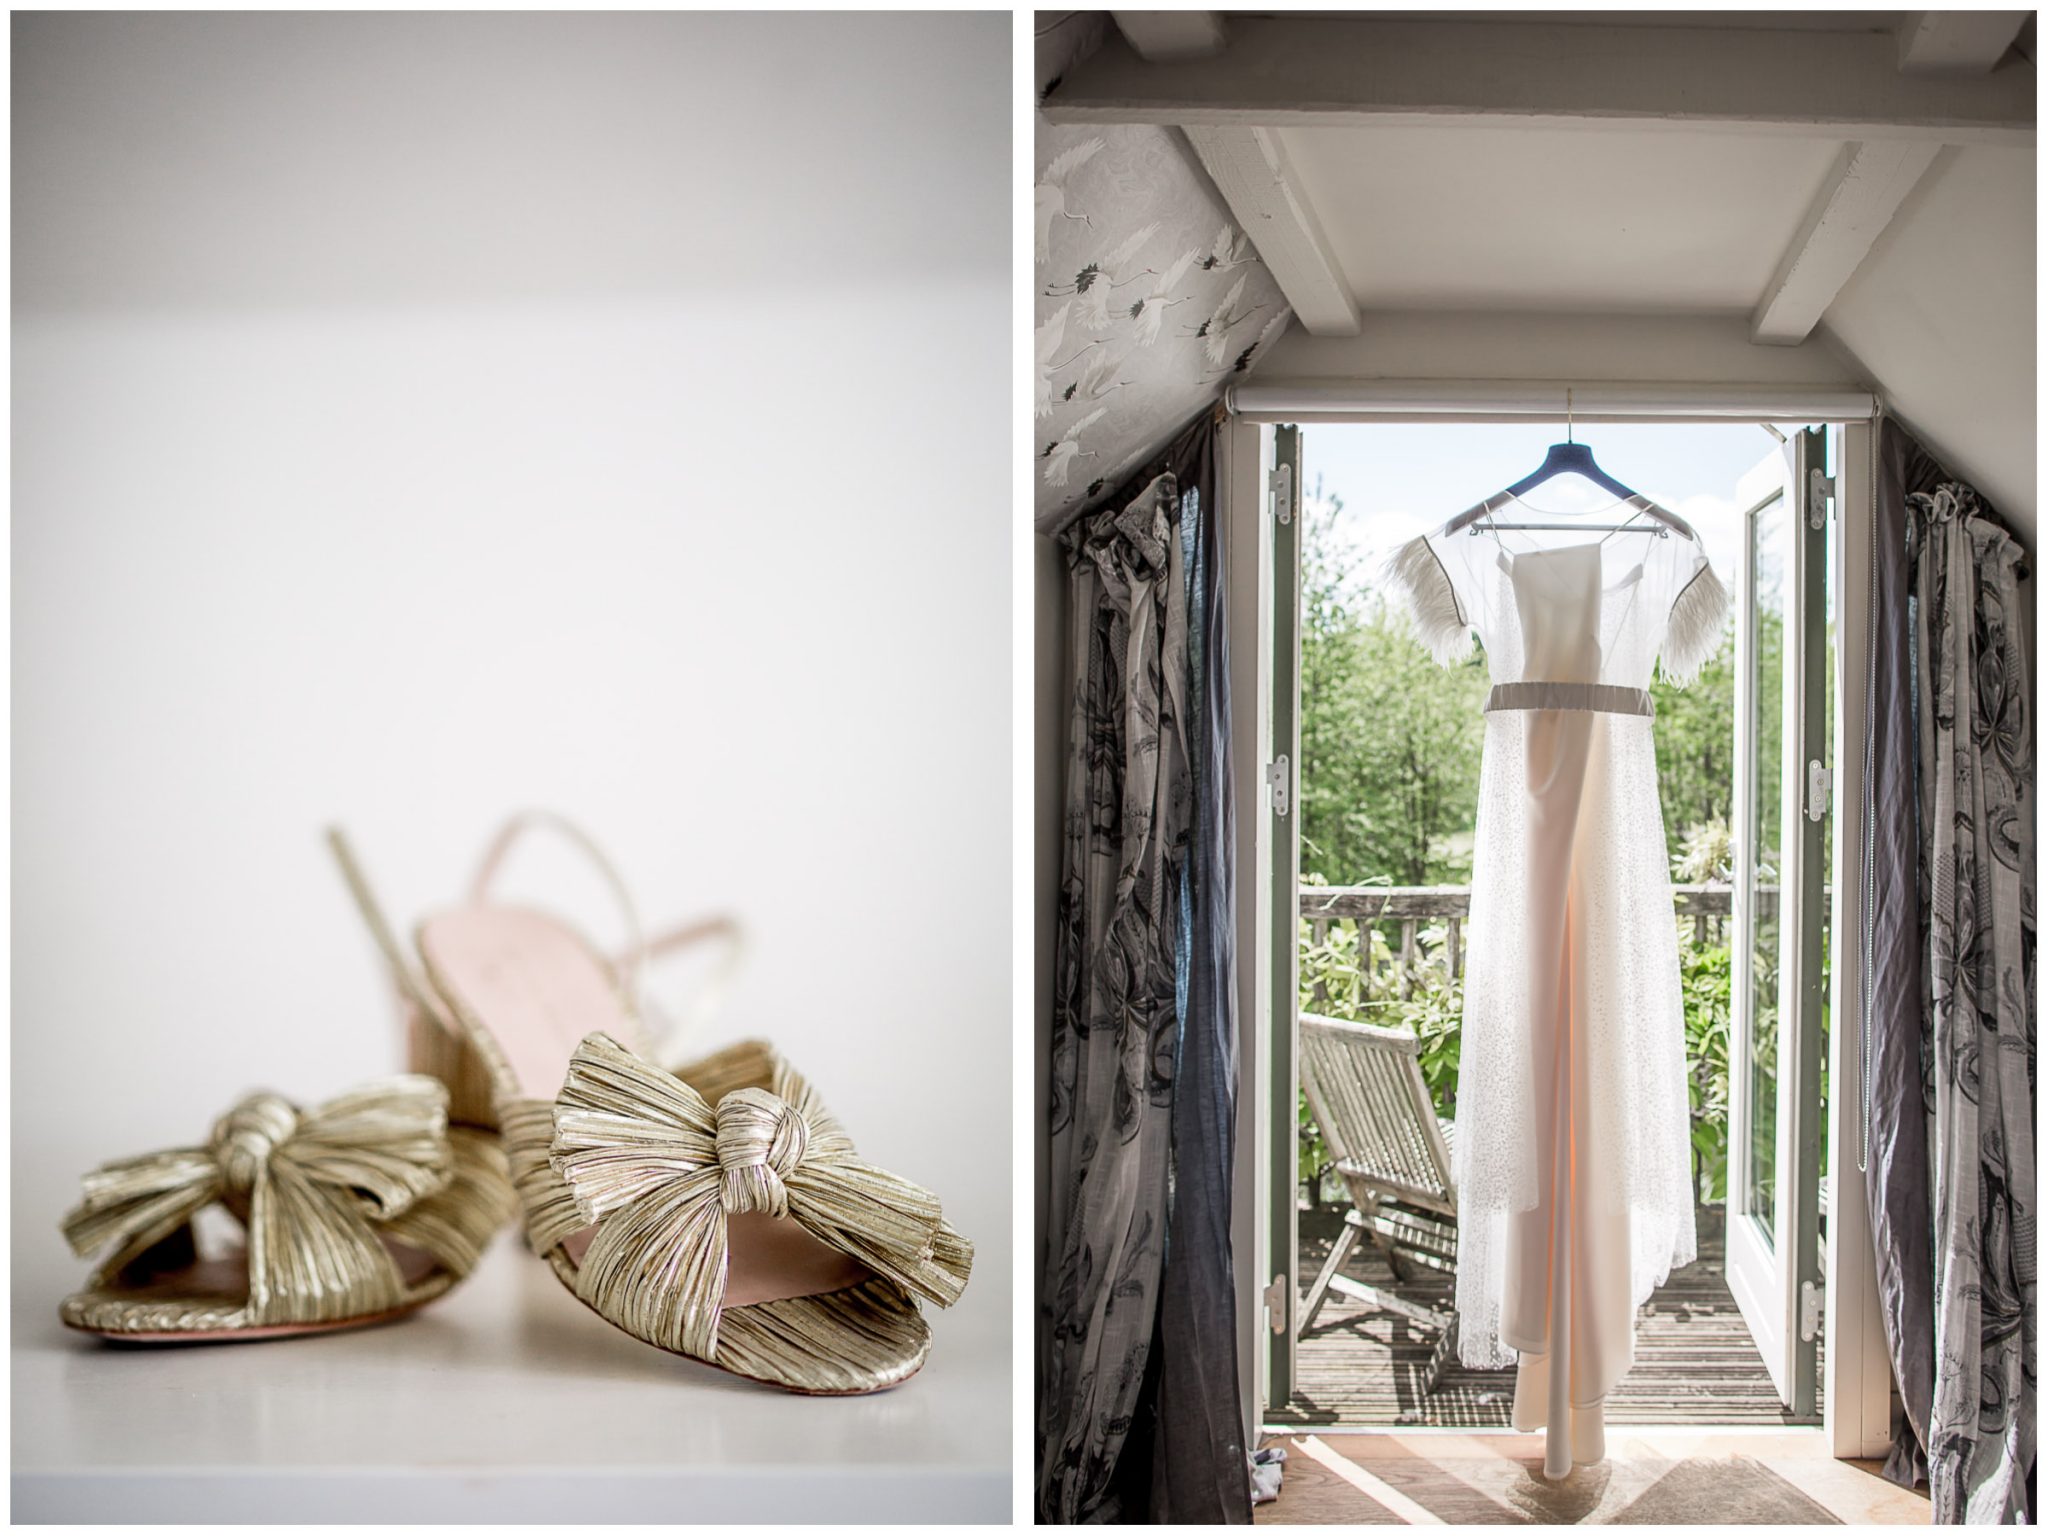 Dress hanging and wedding shoes